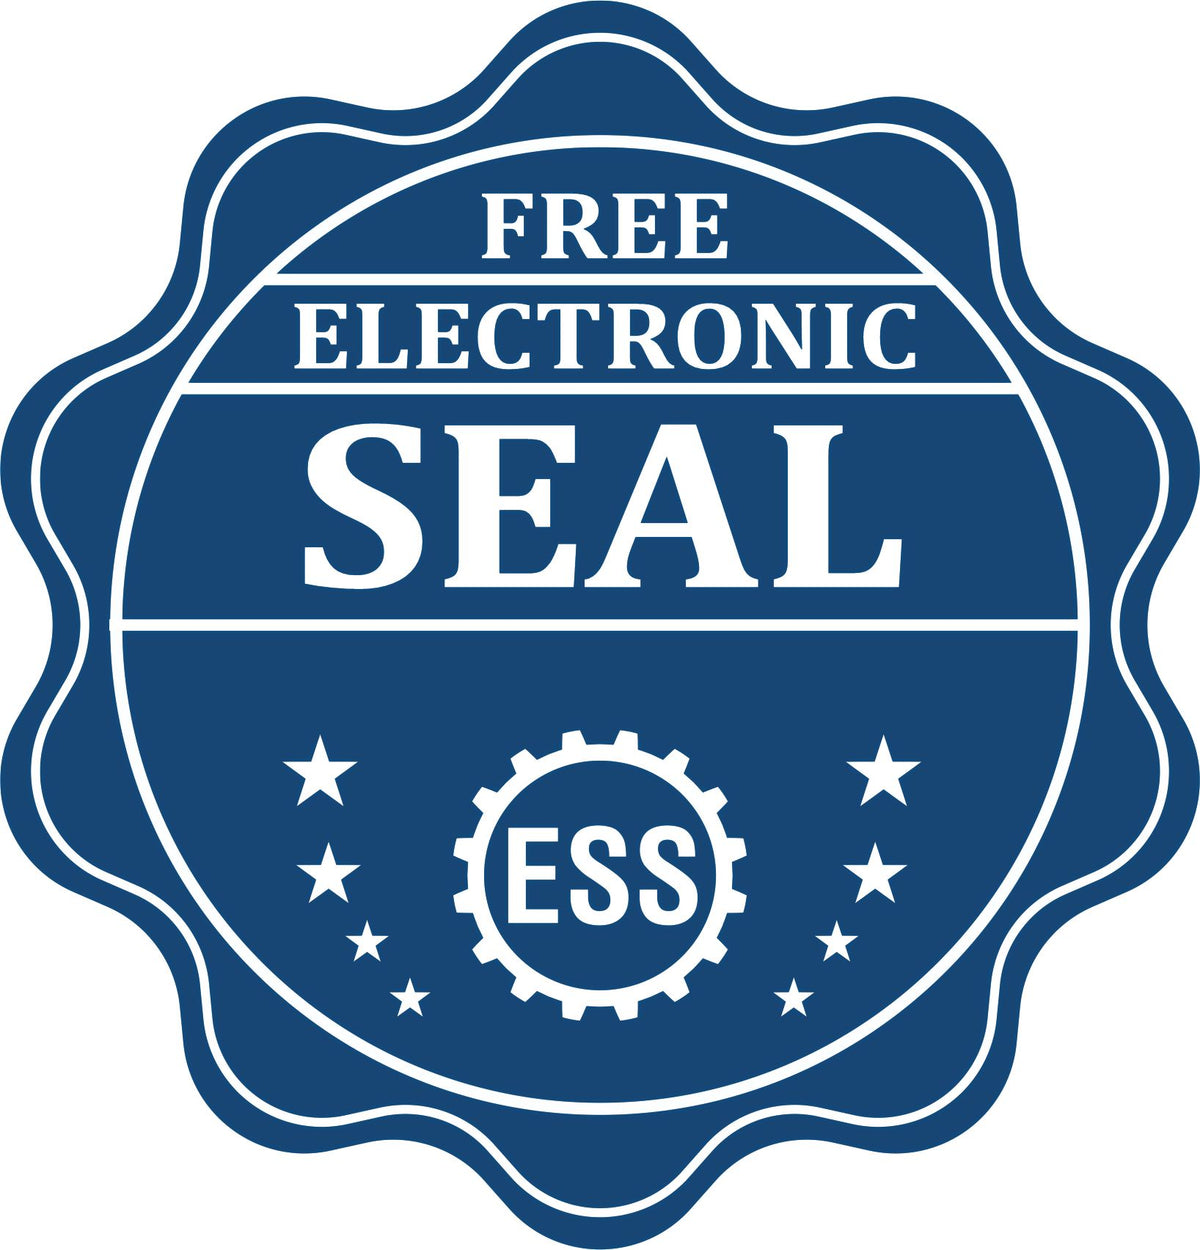 A badge showing a free electronic seal for the Slim Pre-Inked Delaware Landscape Architect Seal Stamp with stars and the ESS gear on the emblem.